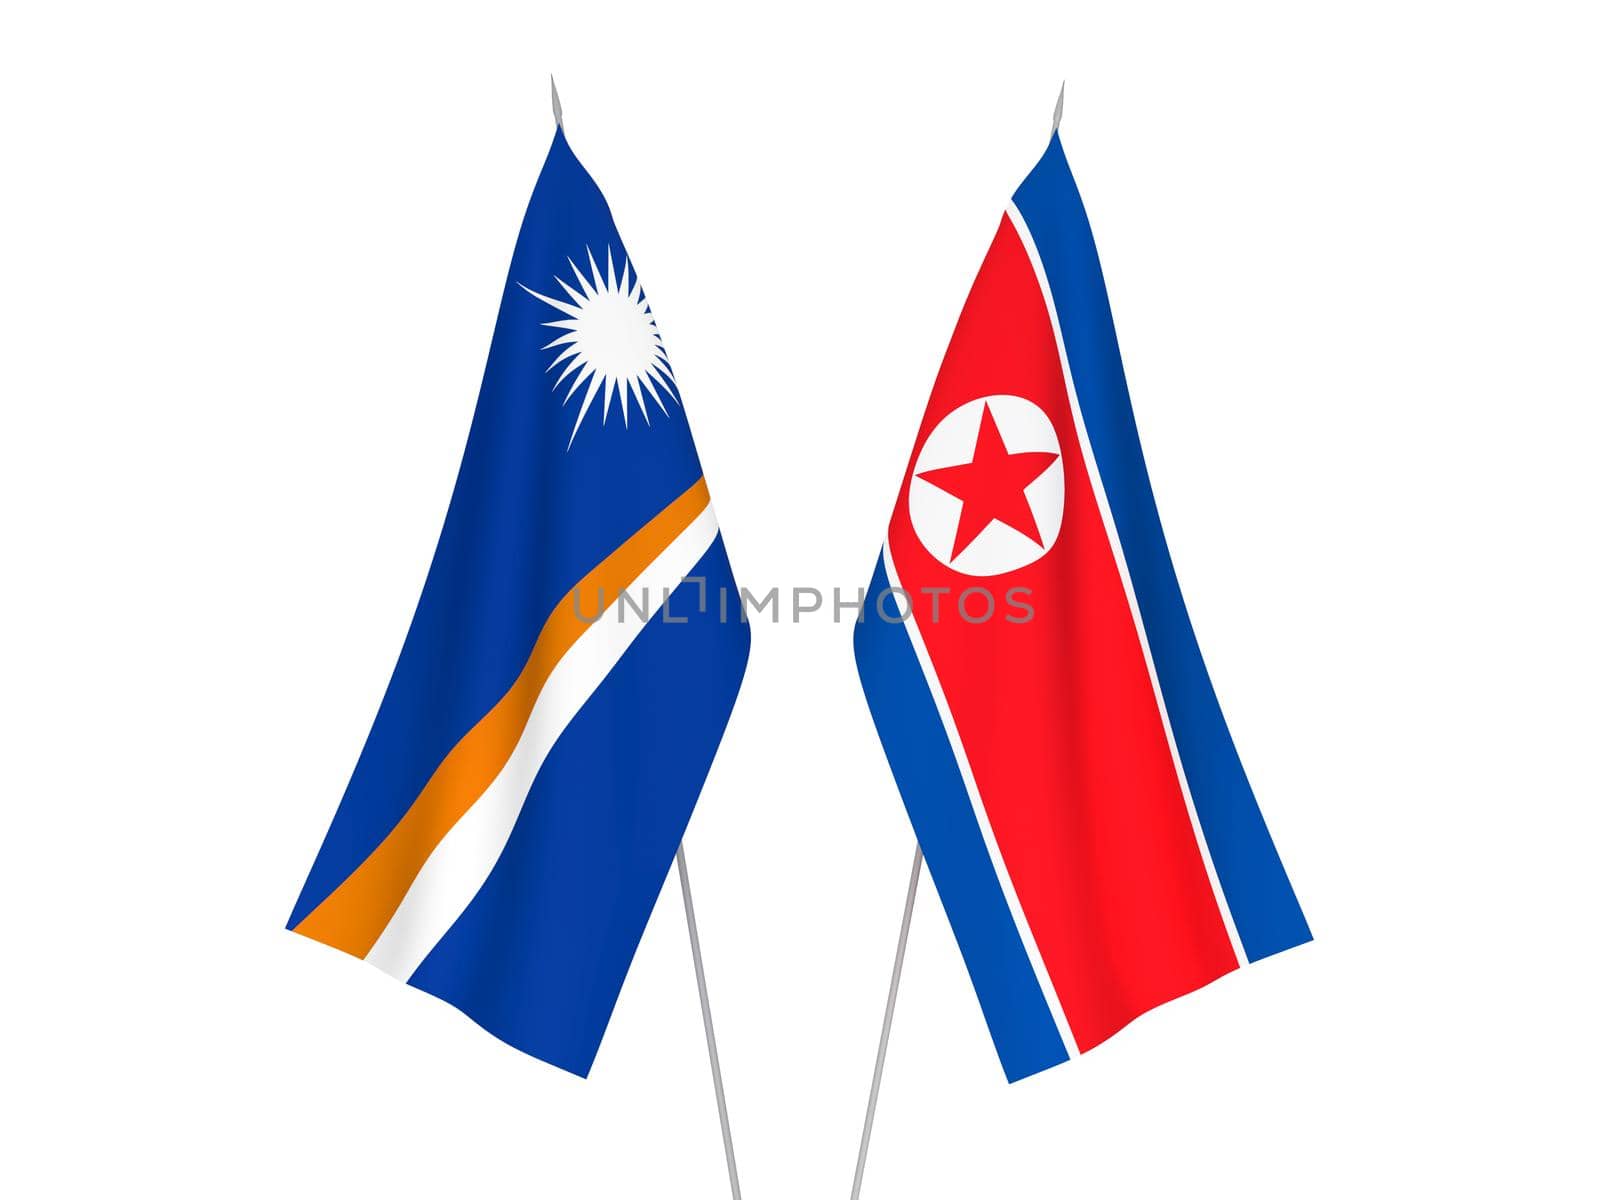 Republic of the Marshall Islands and North Korea flags by epic33